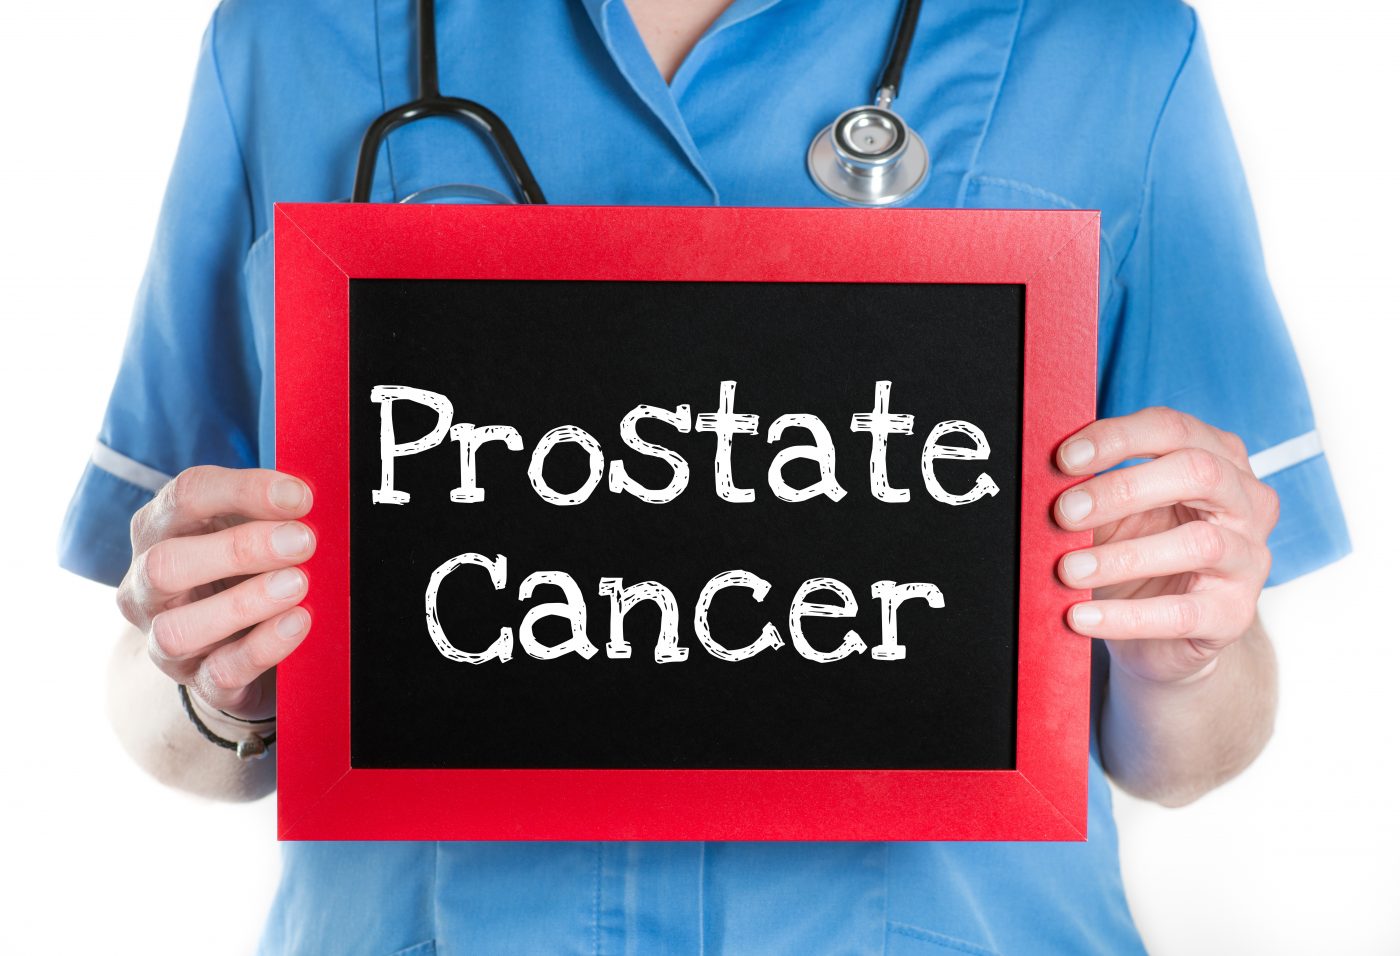 Prostate Cancer Test Predicts Radiotherapy Benefits After Radical Prostatectomy